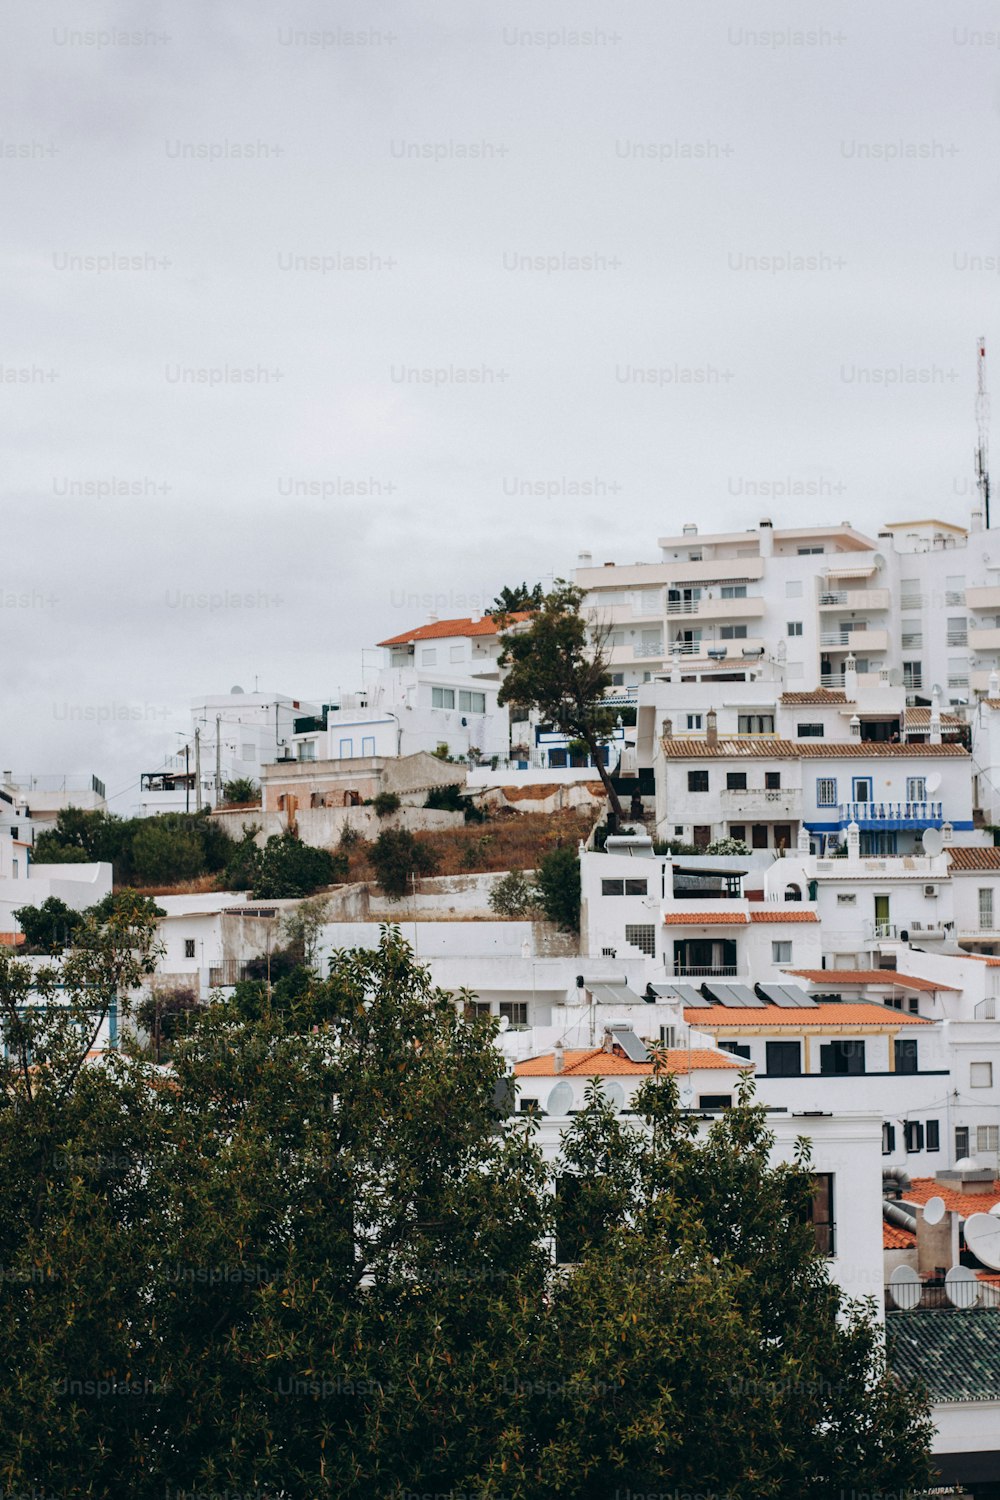 a view of a city with lots of white buildings